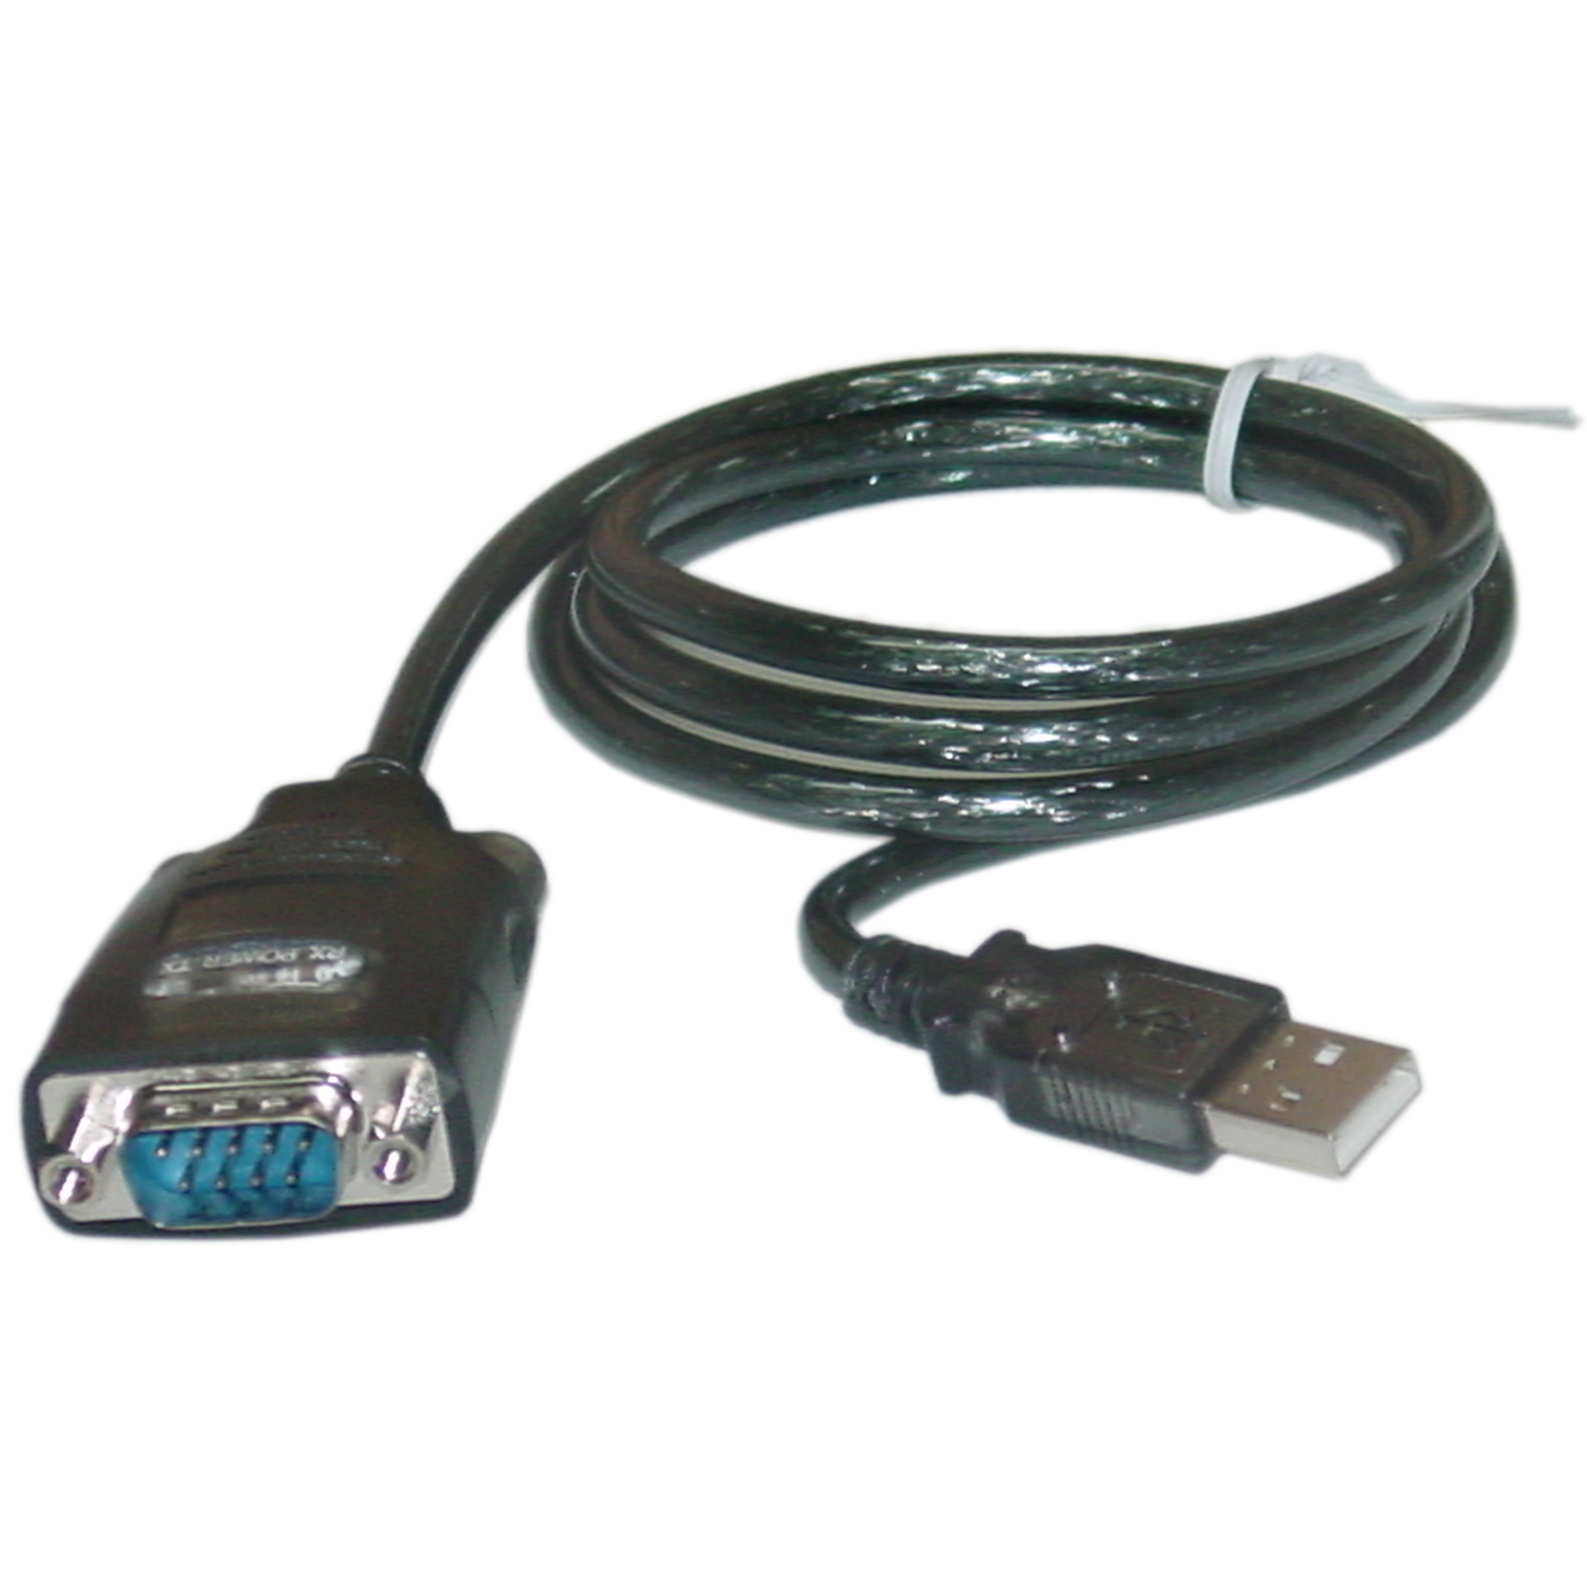 Occus Cable Length: Other Cables USB to RS232 Male Cable USB to Serial Port Holes 9 Holes USB to DB9 Male 9 pin DB9 Cable Adapter Support Wholesale Computer Occus 